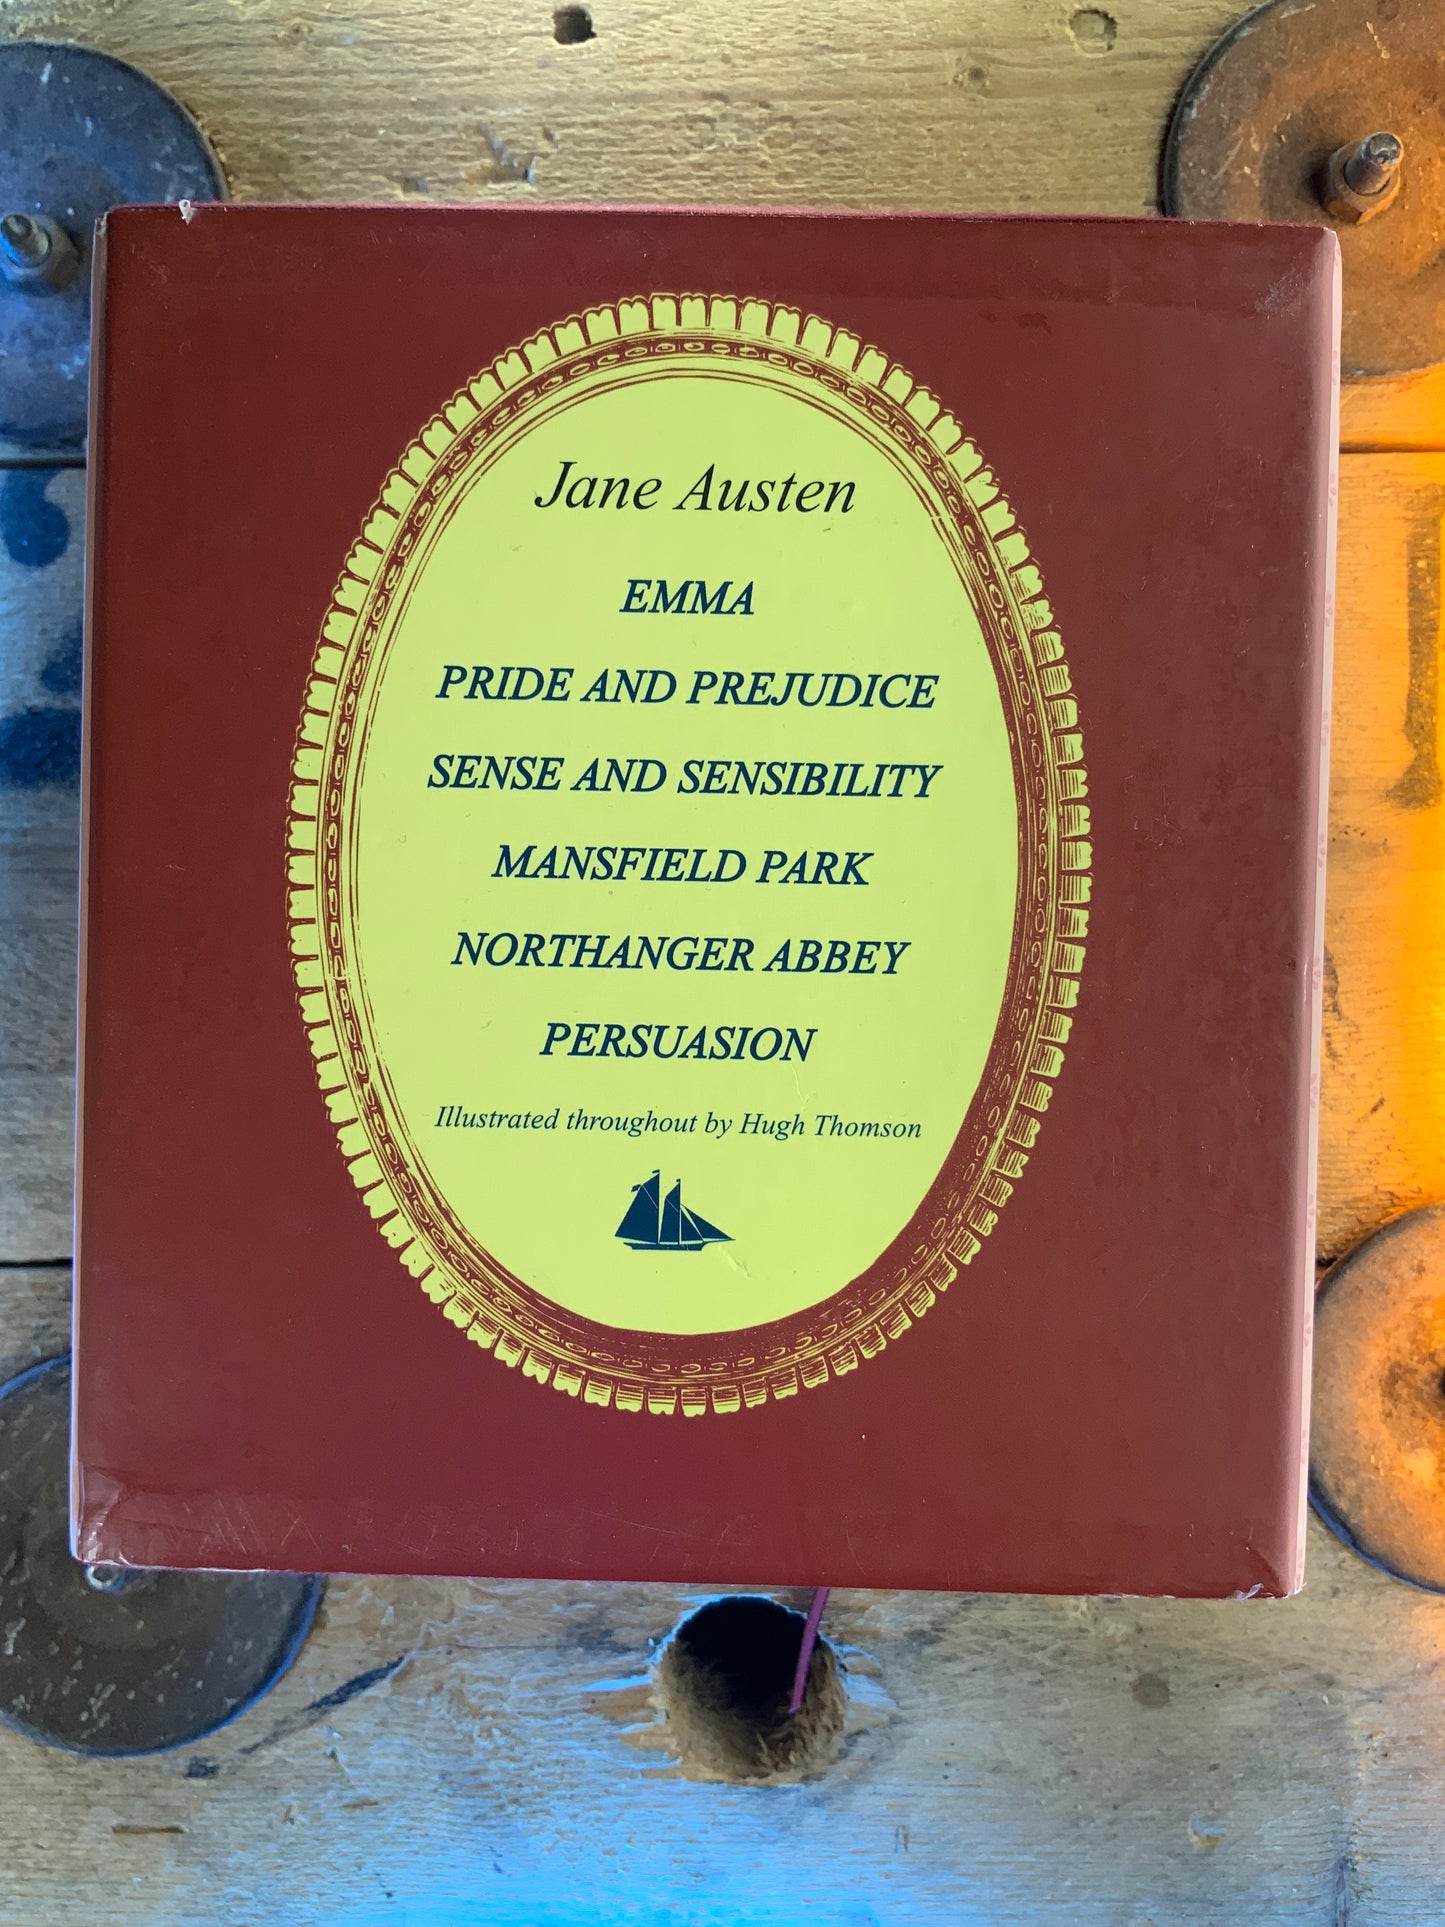 Jane Austen Collector's Library (Six Volume Set) including : Pride and prejudice - Sense and sensibility - Mansfield Park - Northanger Abbey - Persuasion